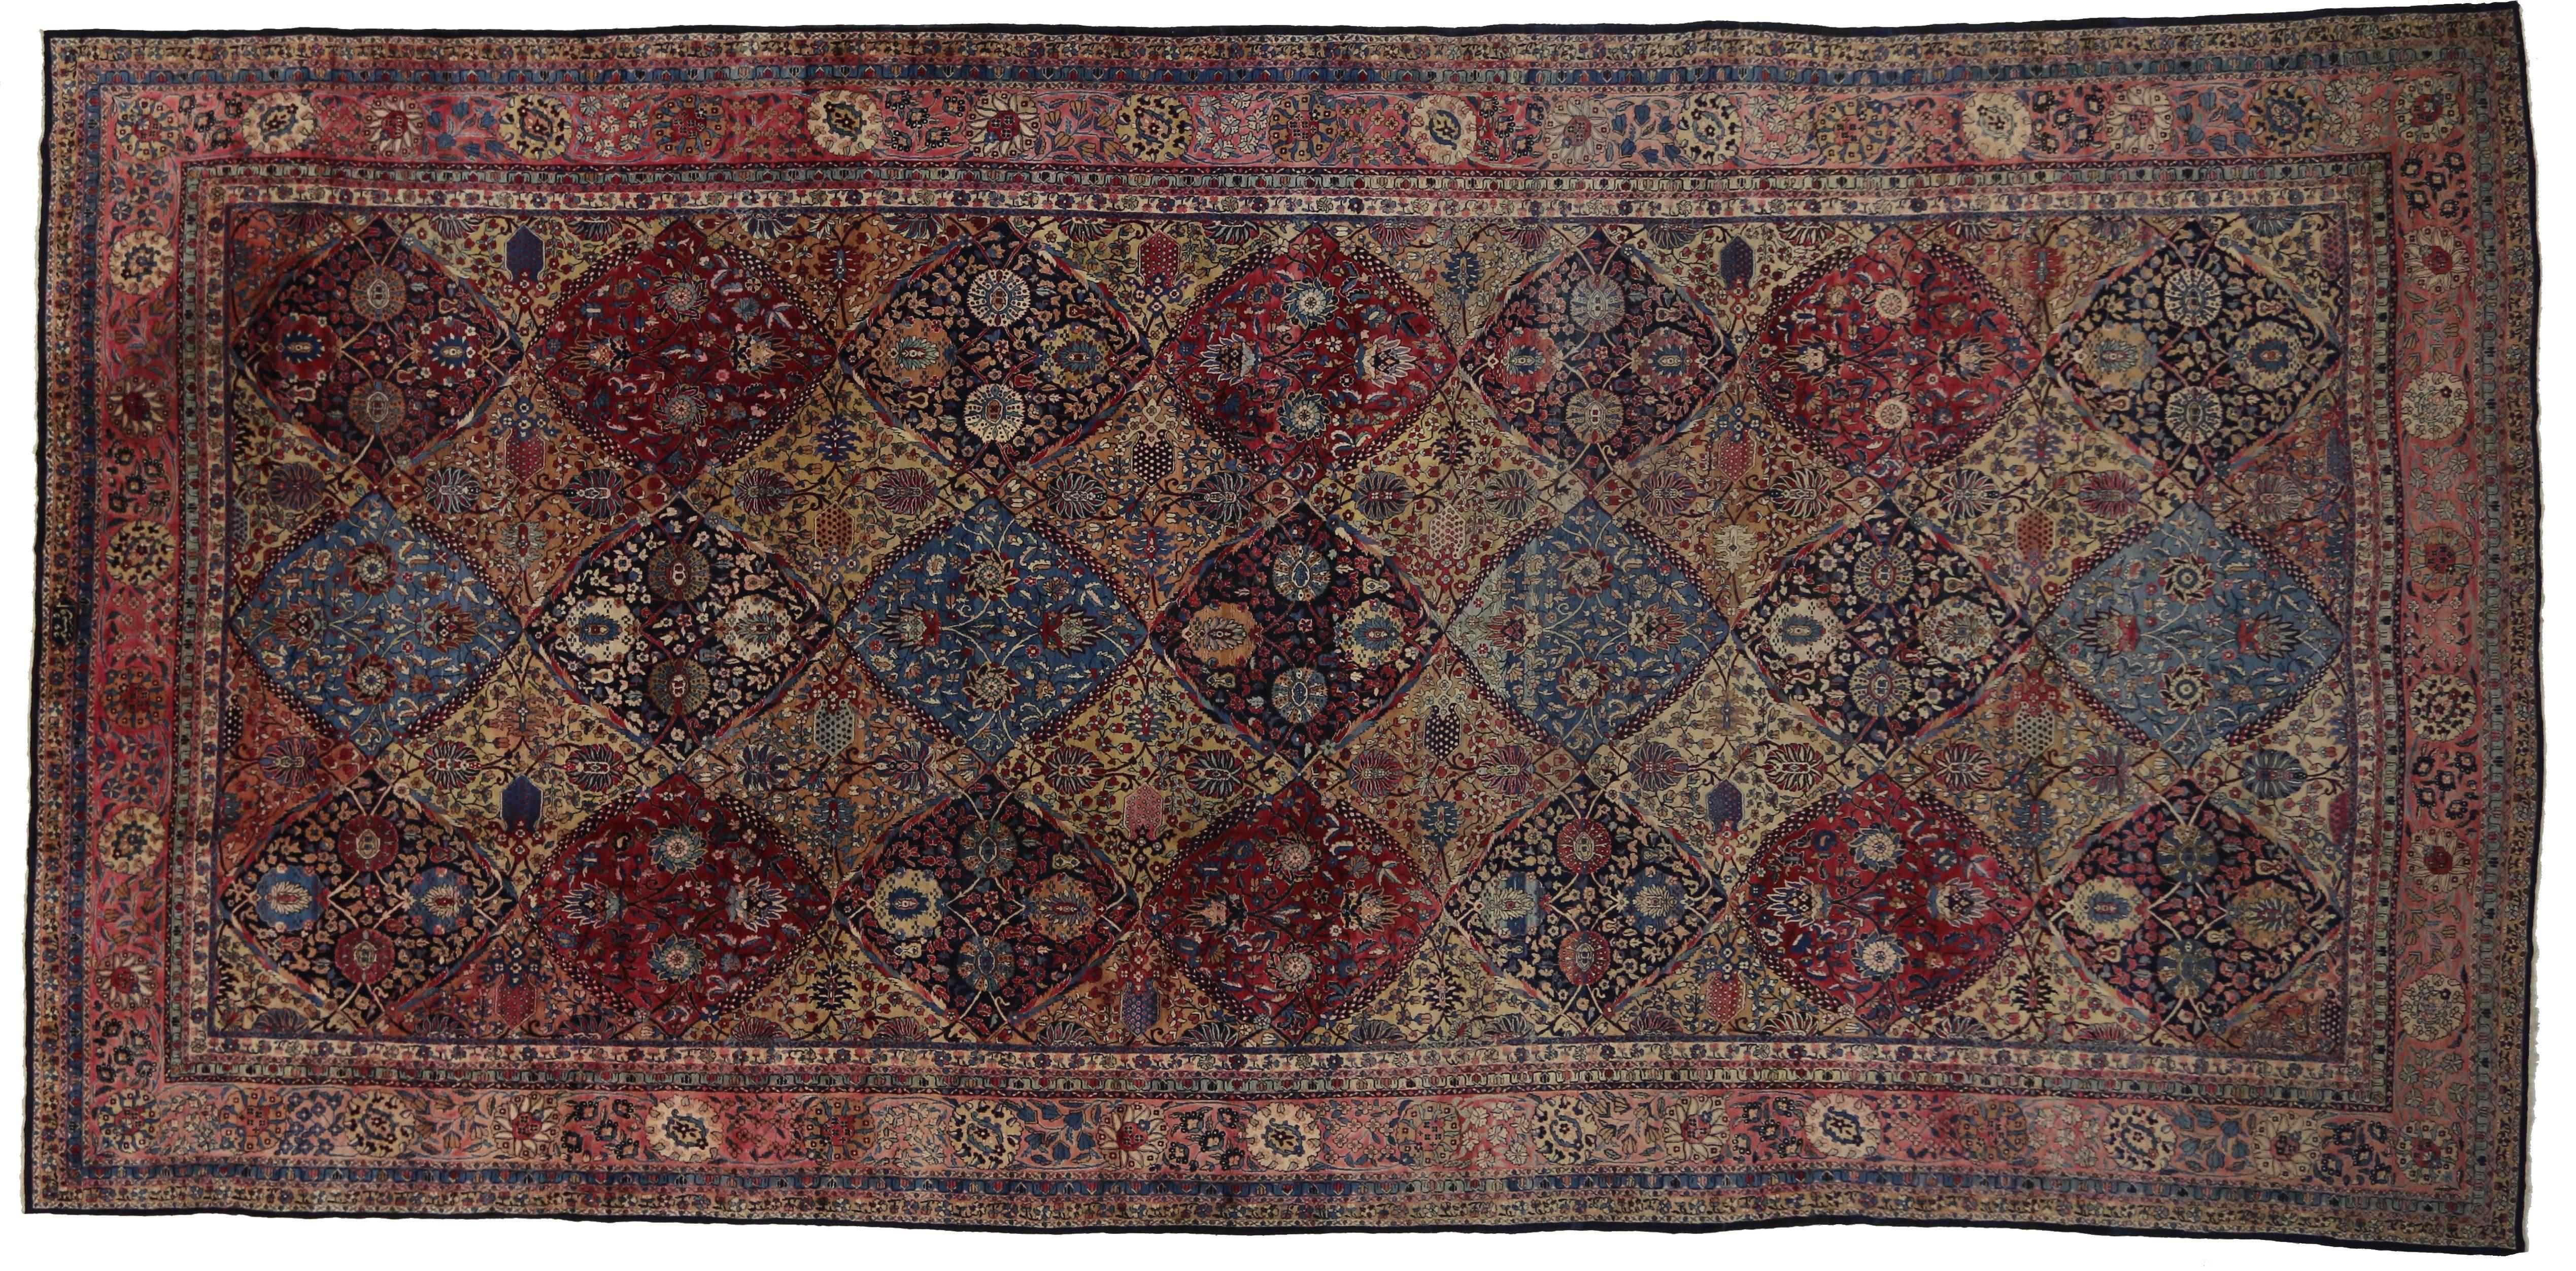 20th Century Oversized Antique Persian Kerman Rug, Hotel Lobby Size Carpet For Sale